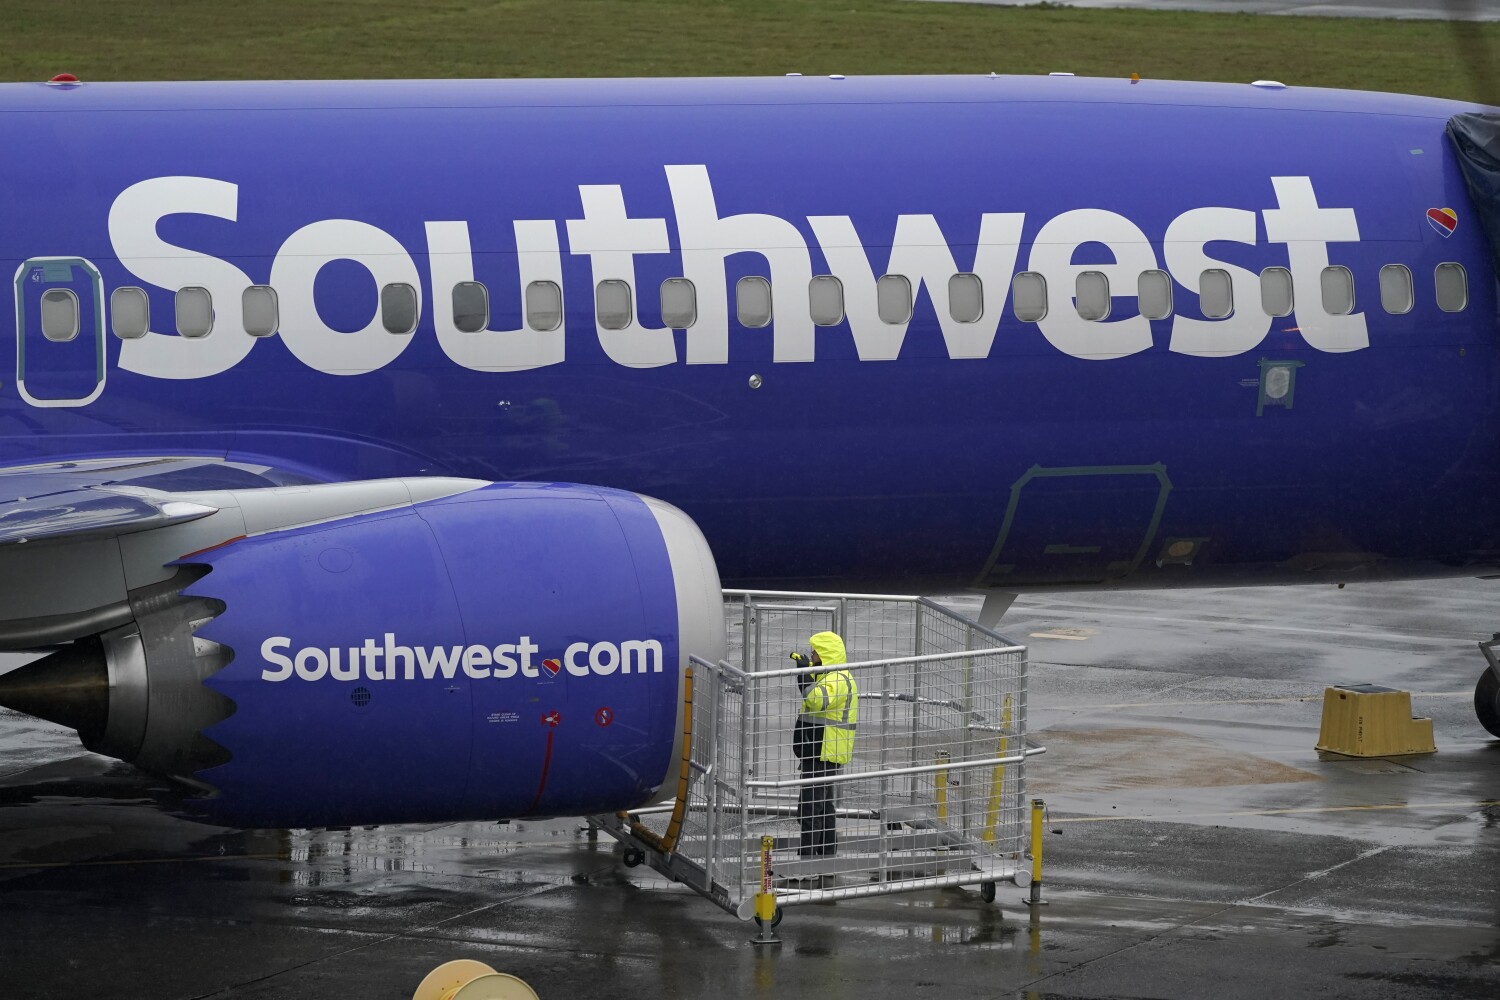 Passenger banned from Southwest Airlines after altercation